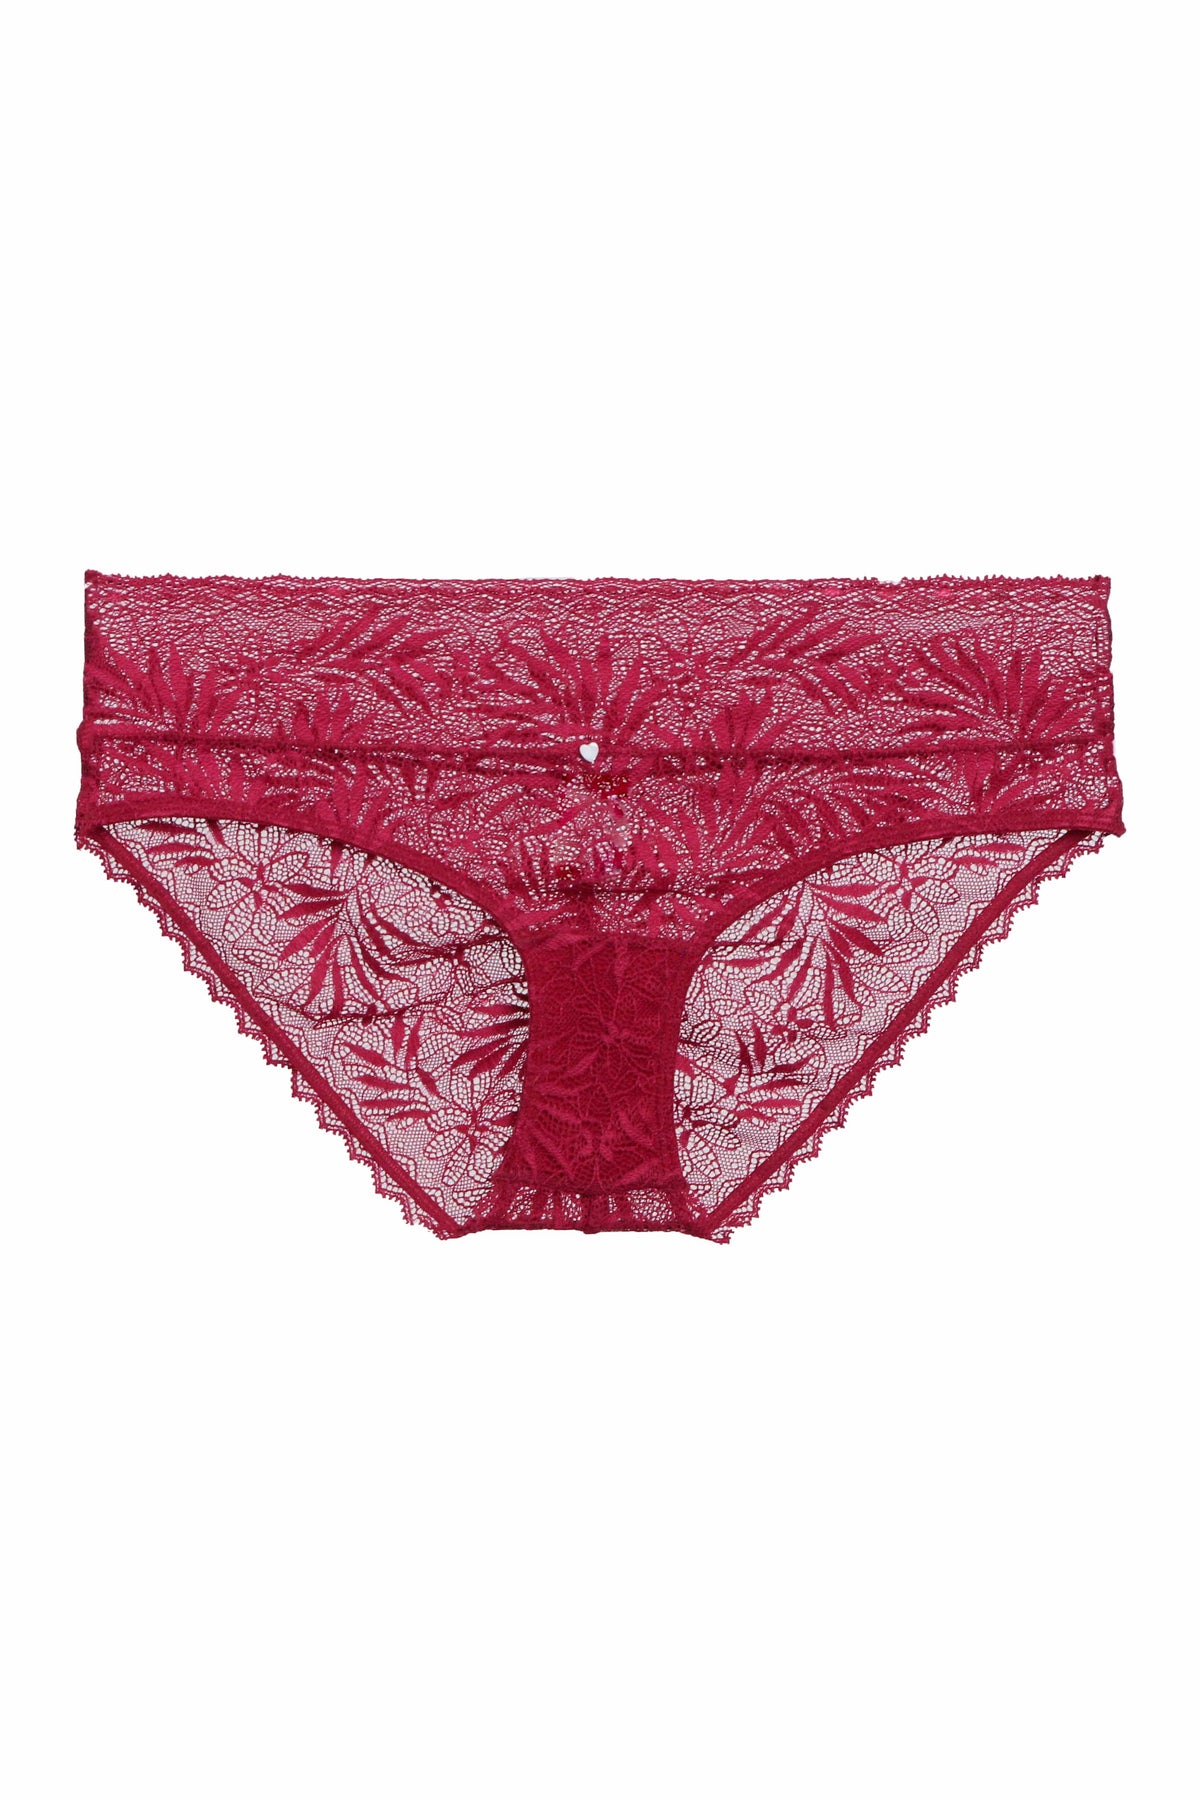 Clo Intimo Briefs Rumba Red / S Selva Brief - Red